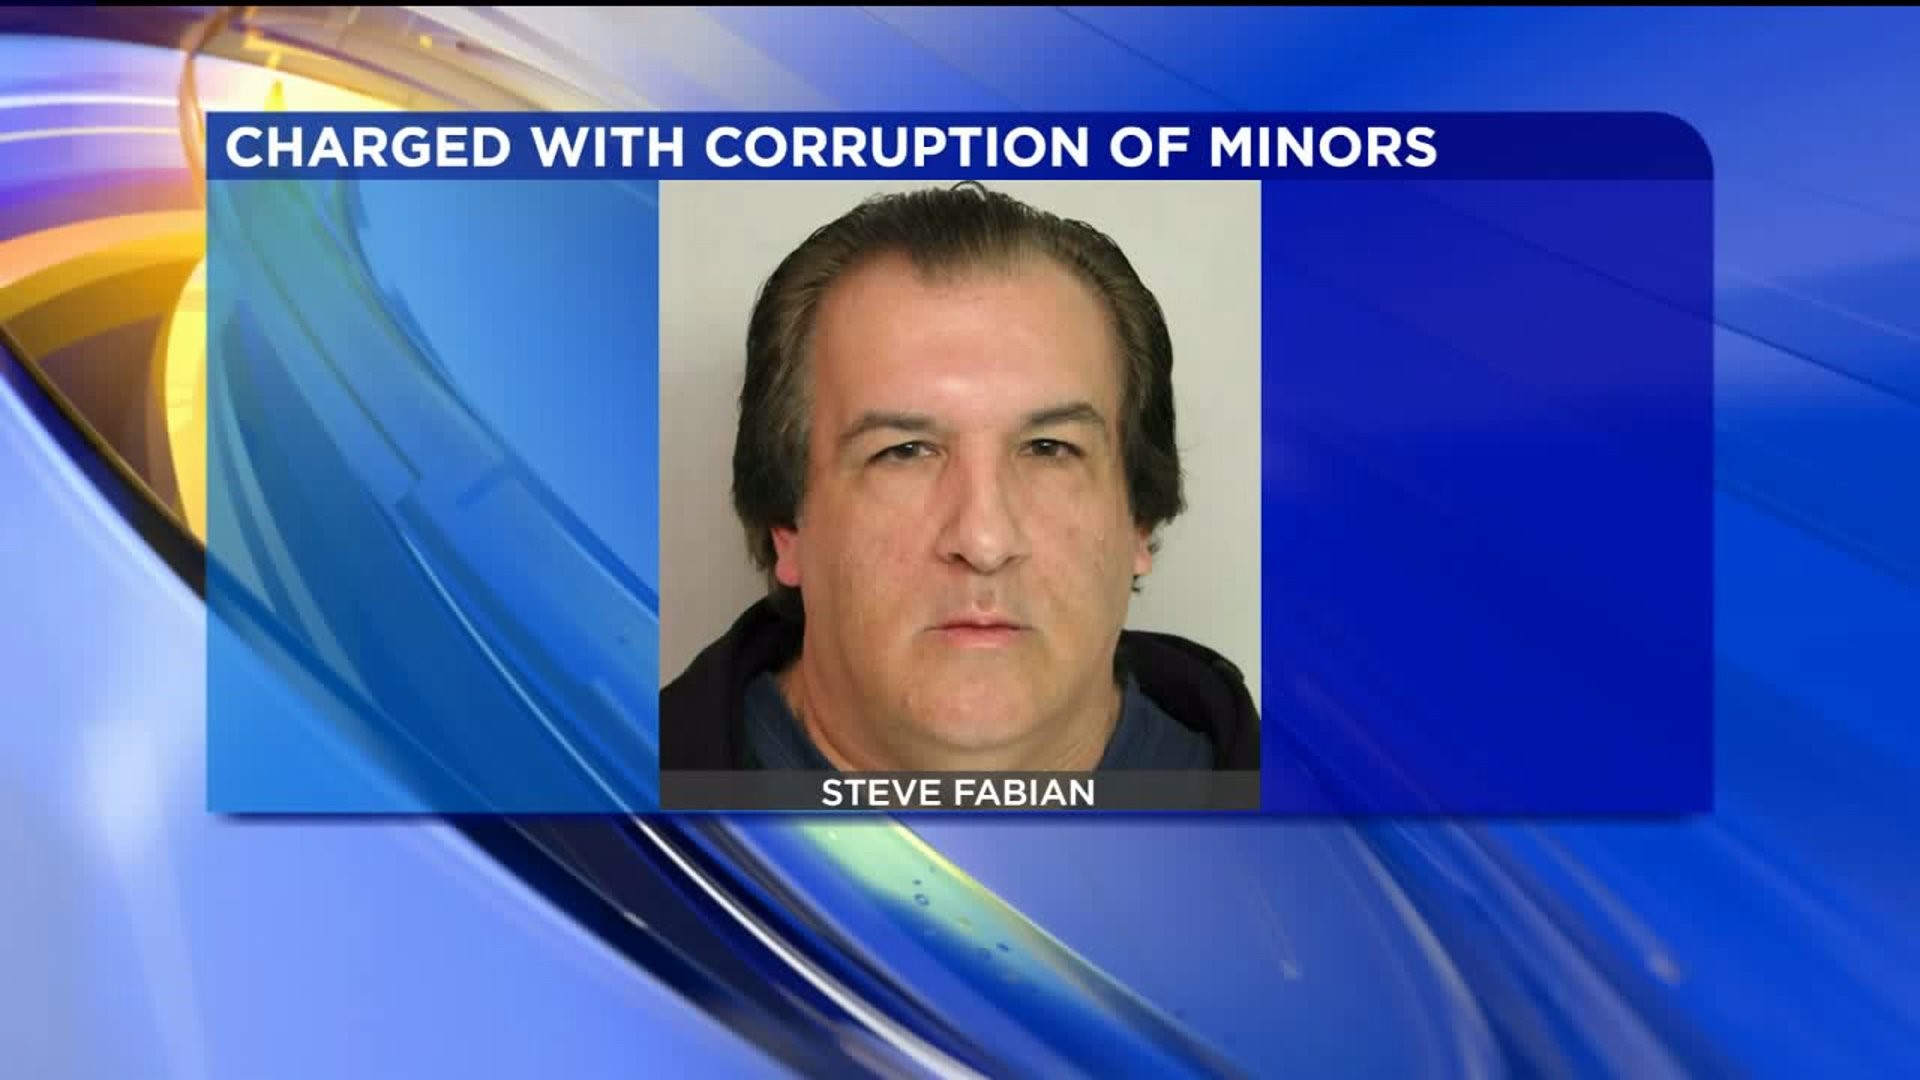 Scranton Man Charged with Corruption of Minors